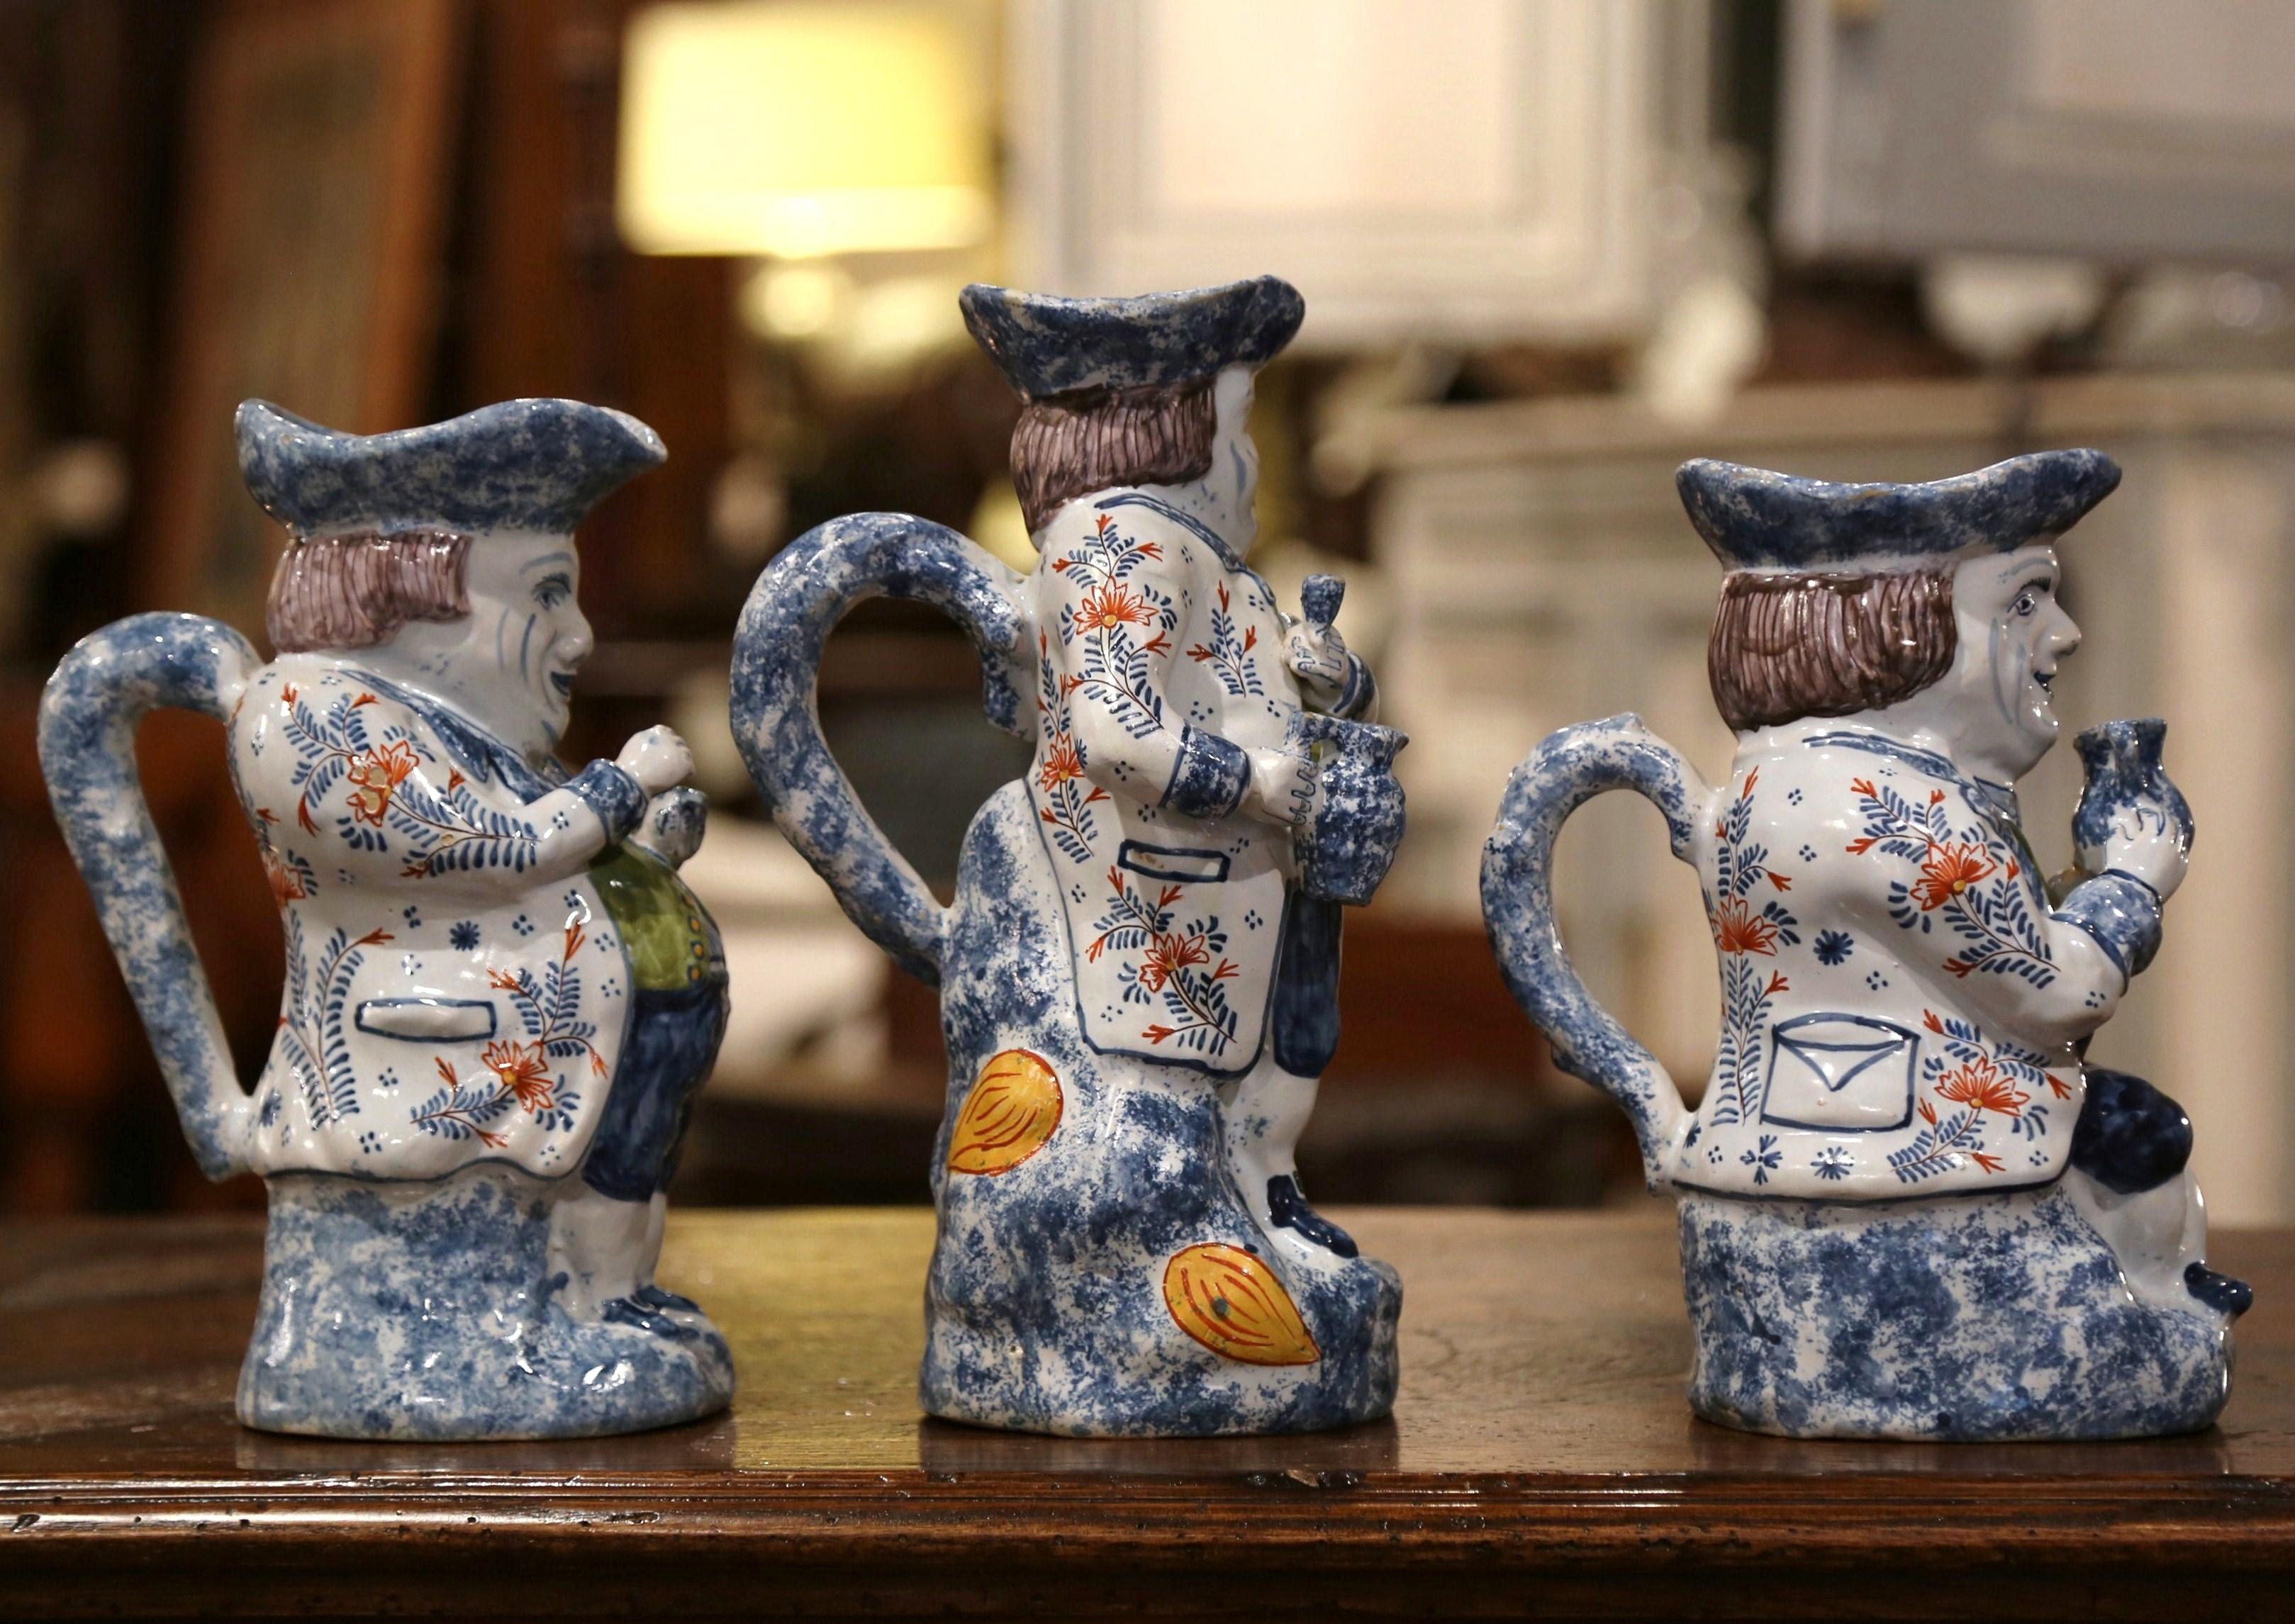 Decorate a wet bar or a shelf with this charming, sculptural Majolica pitchers suite, crafted in Normandy, France circa 1880, each colorful pitcher features a happy man's sculpture dressed in tuxedo and serving wine. The carved pitchers set are hand